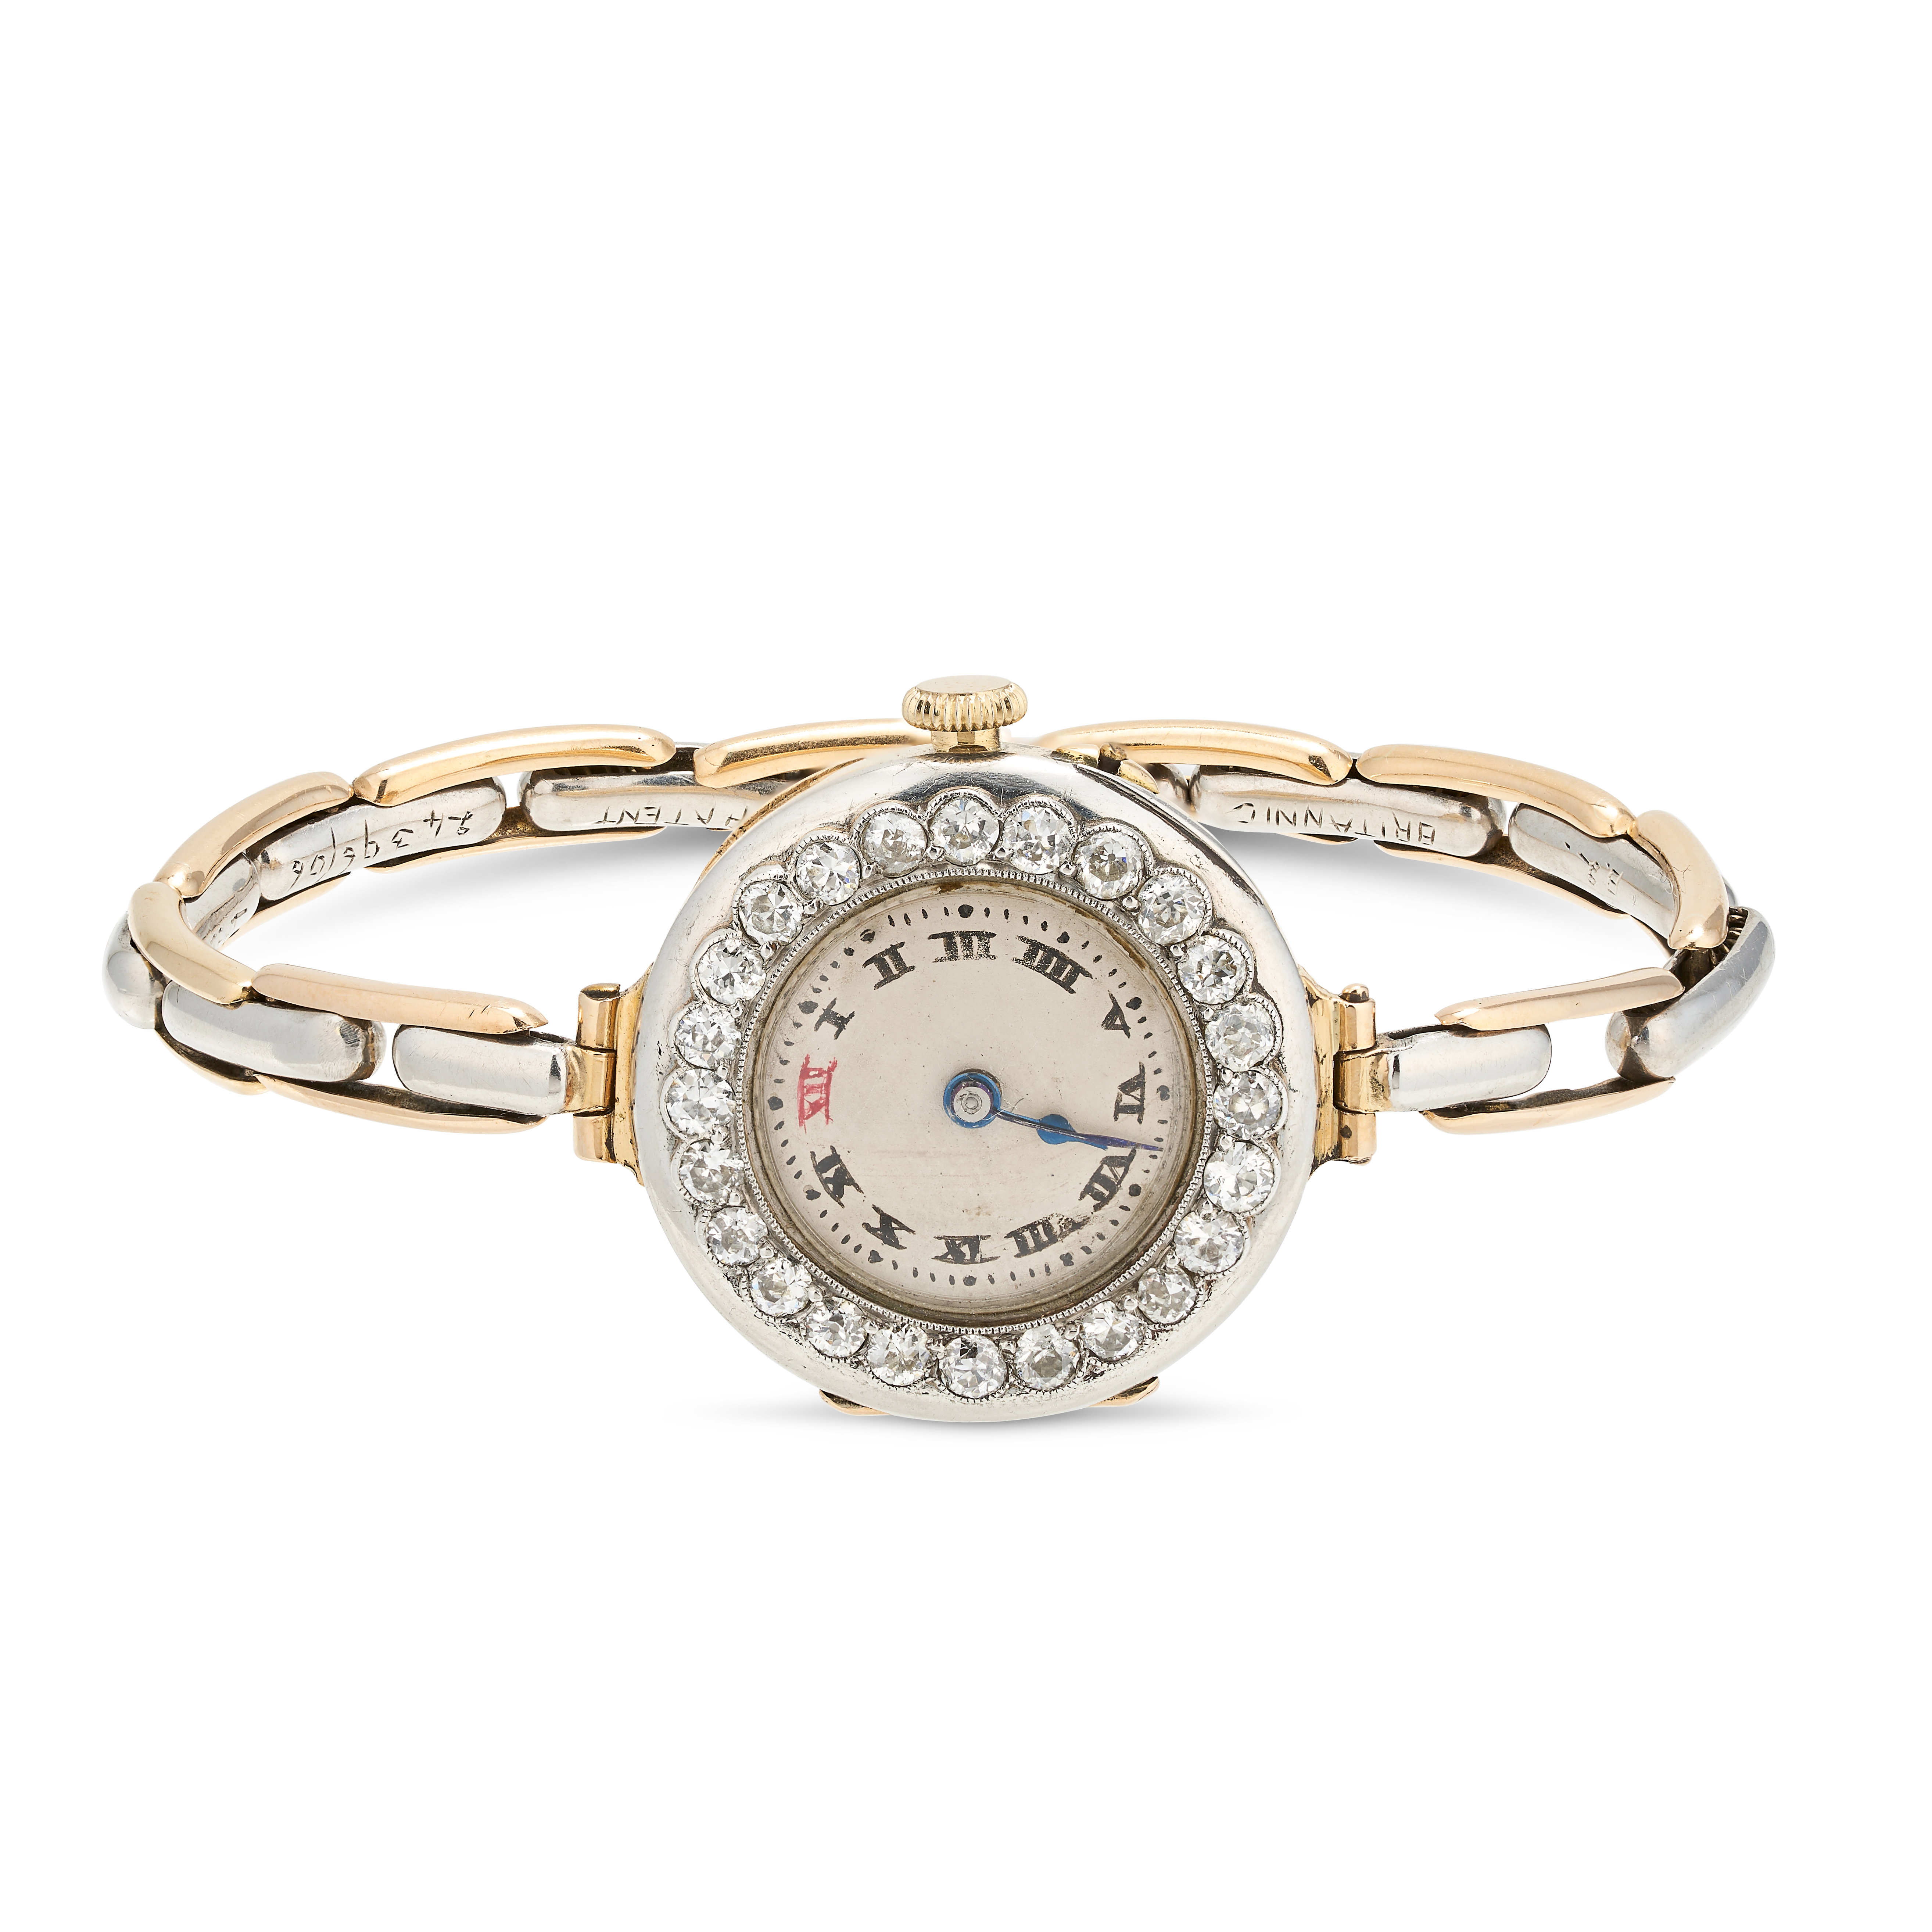 AN ANTIQUE DIAMOND COCKTAIL WATCH, 1912 in 18ct yellow gold and white gold, the circular dial wit...